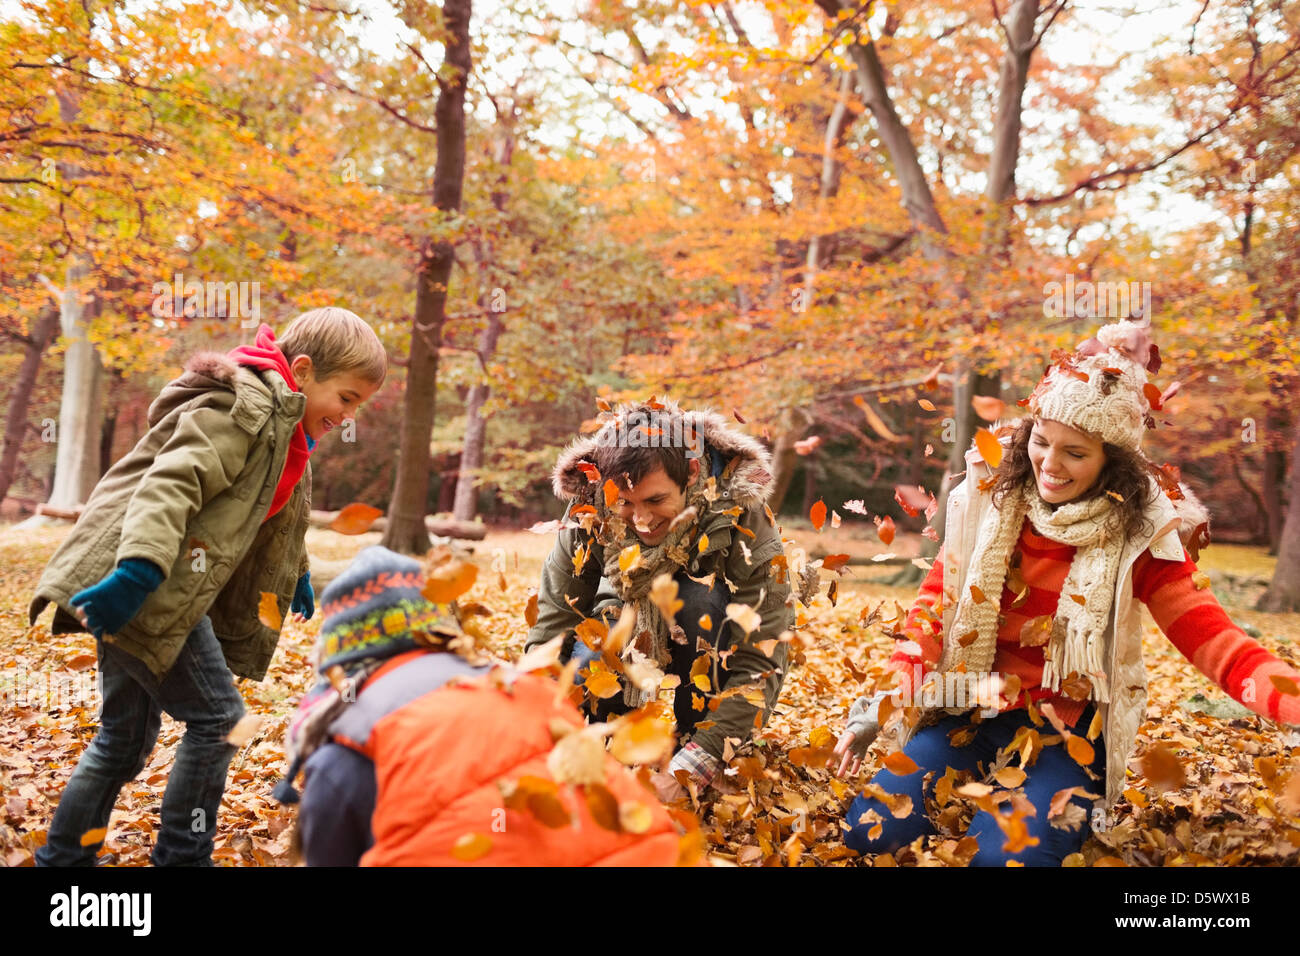 Family playing in autumn leaves in park Stock Photo